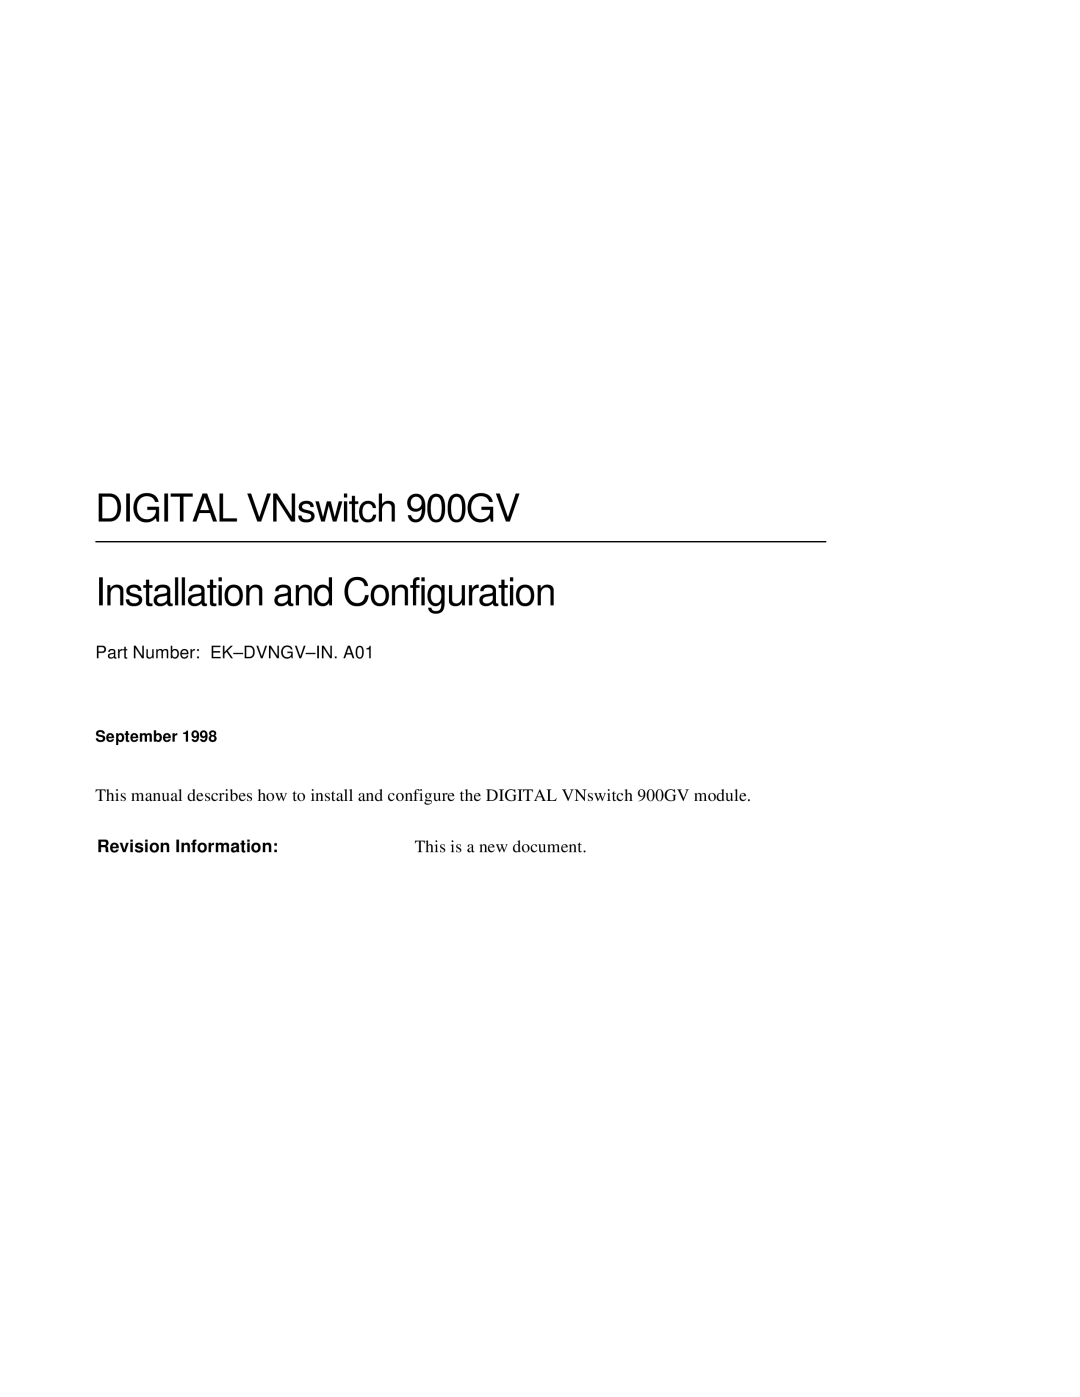 Network Technologies manual Digital VNswitch 900GV Installation and Configuration, Revision Information 